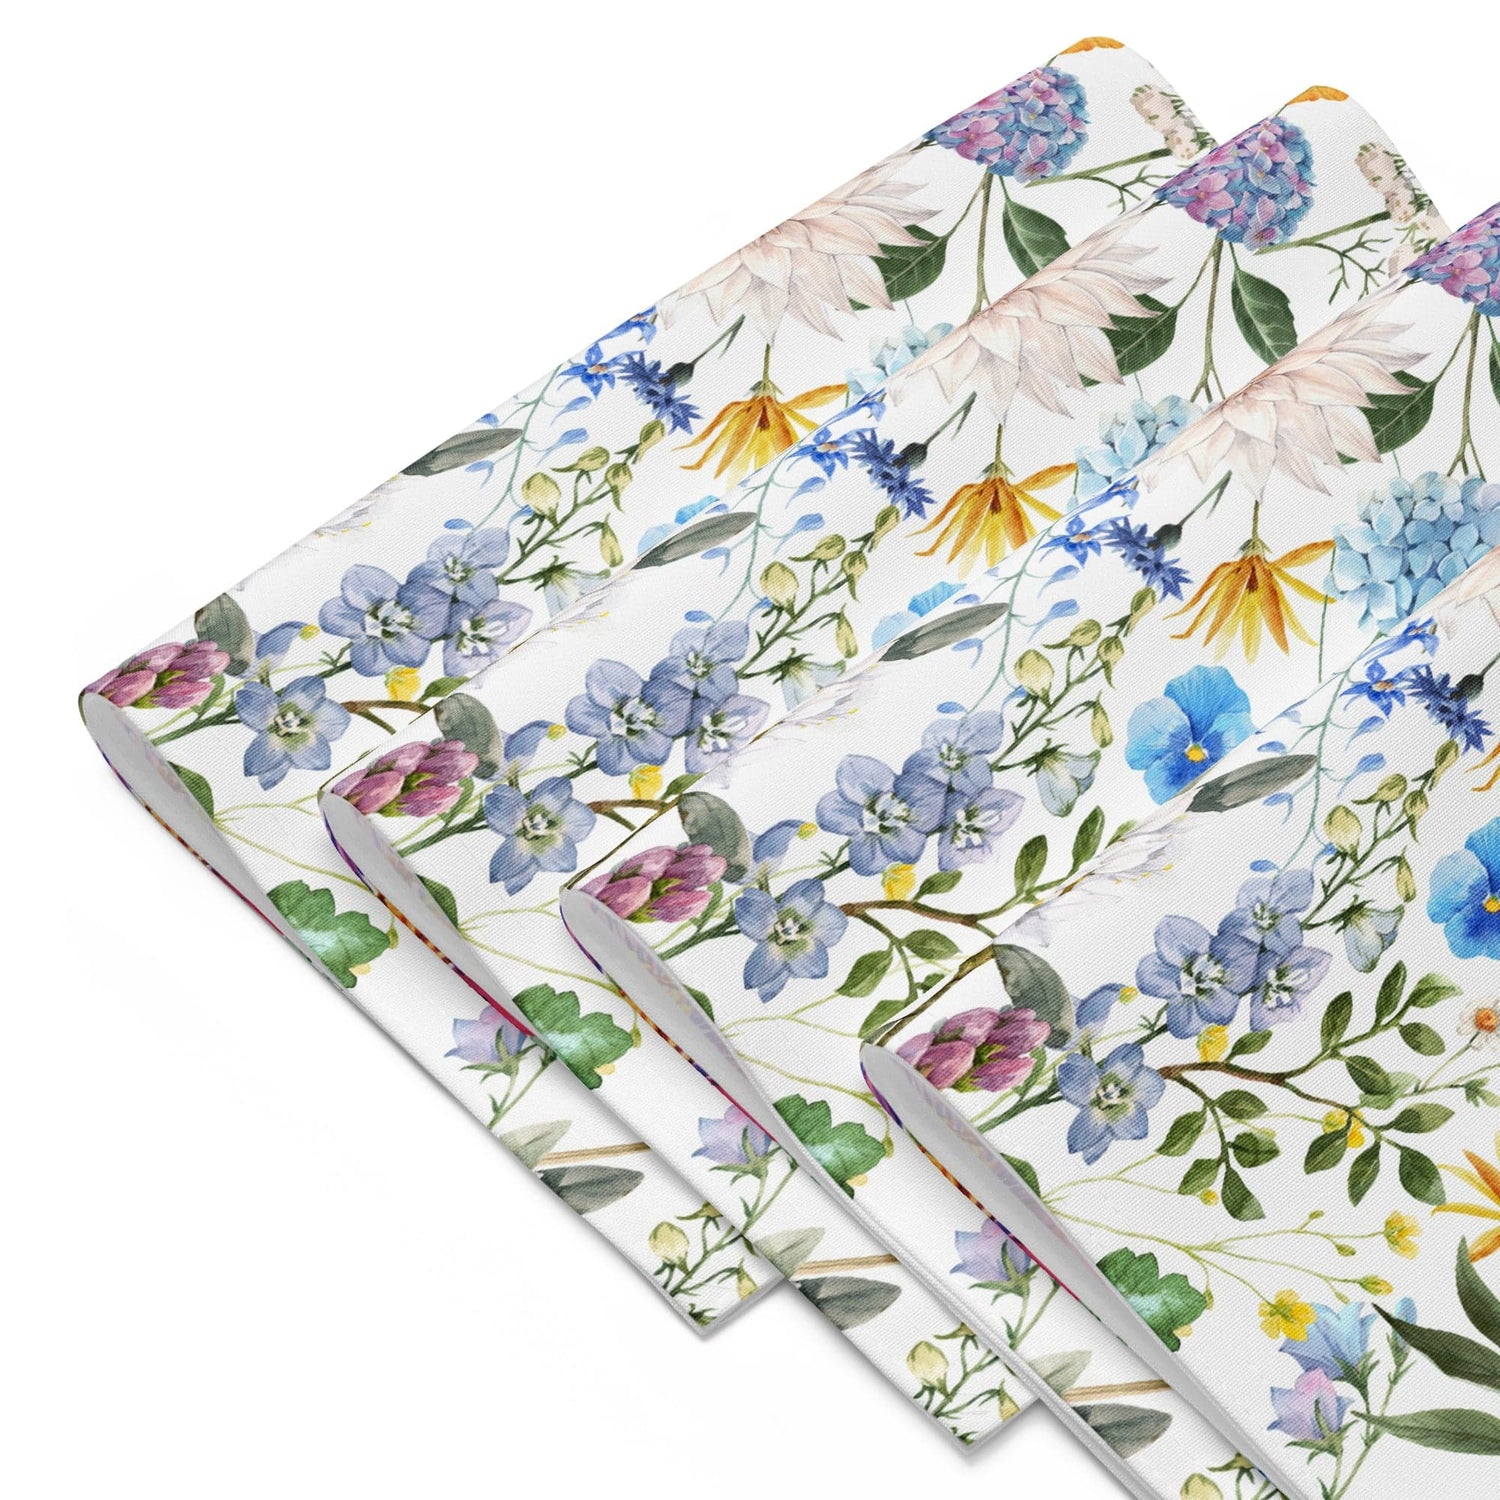 Kate McEnroe New York Watercolor Spring Floral Bloom 4-Piece Placemat Set Placemats 3703010_17484